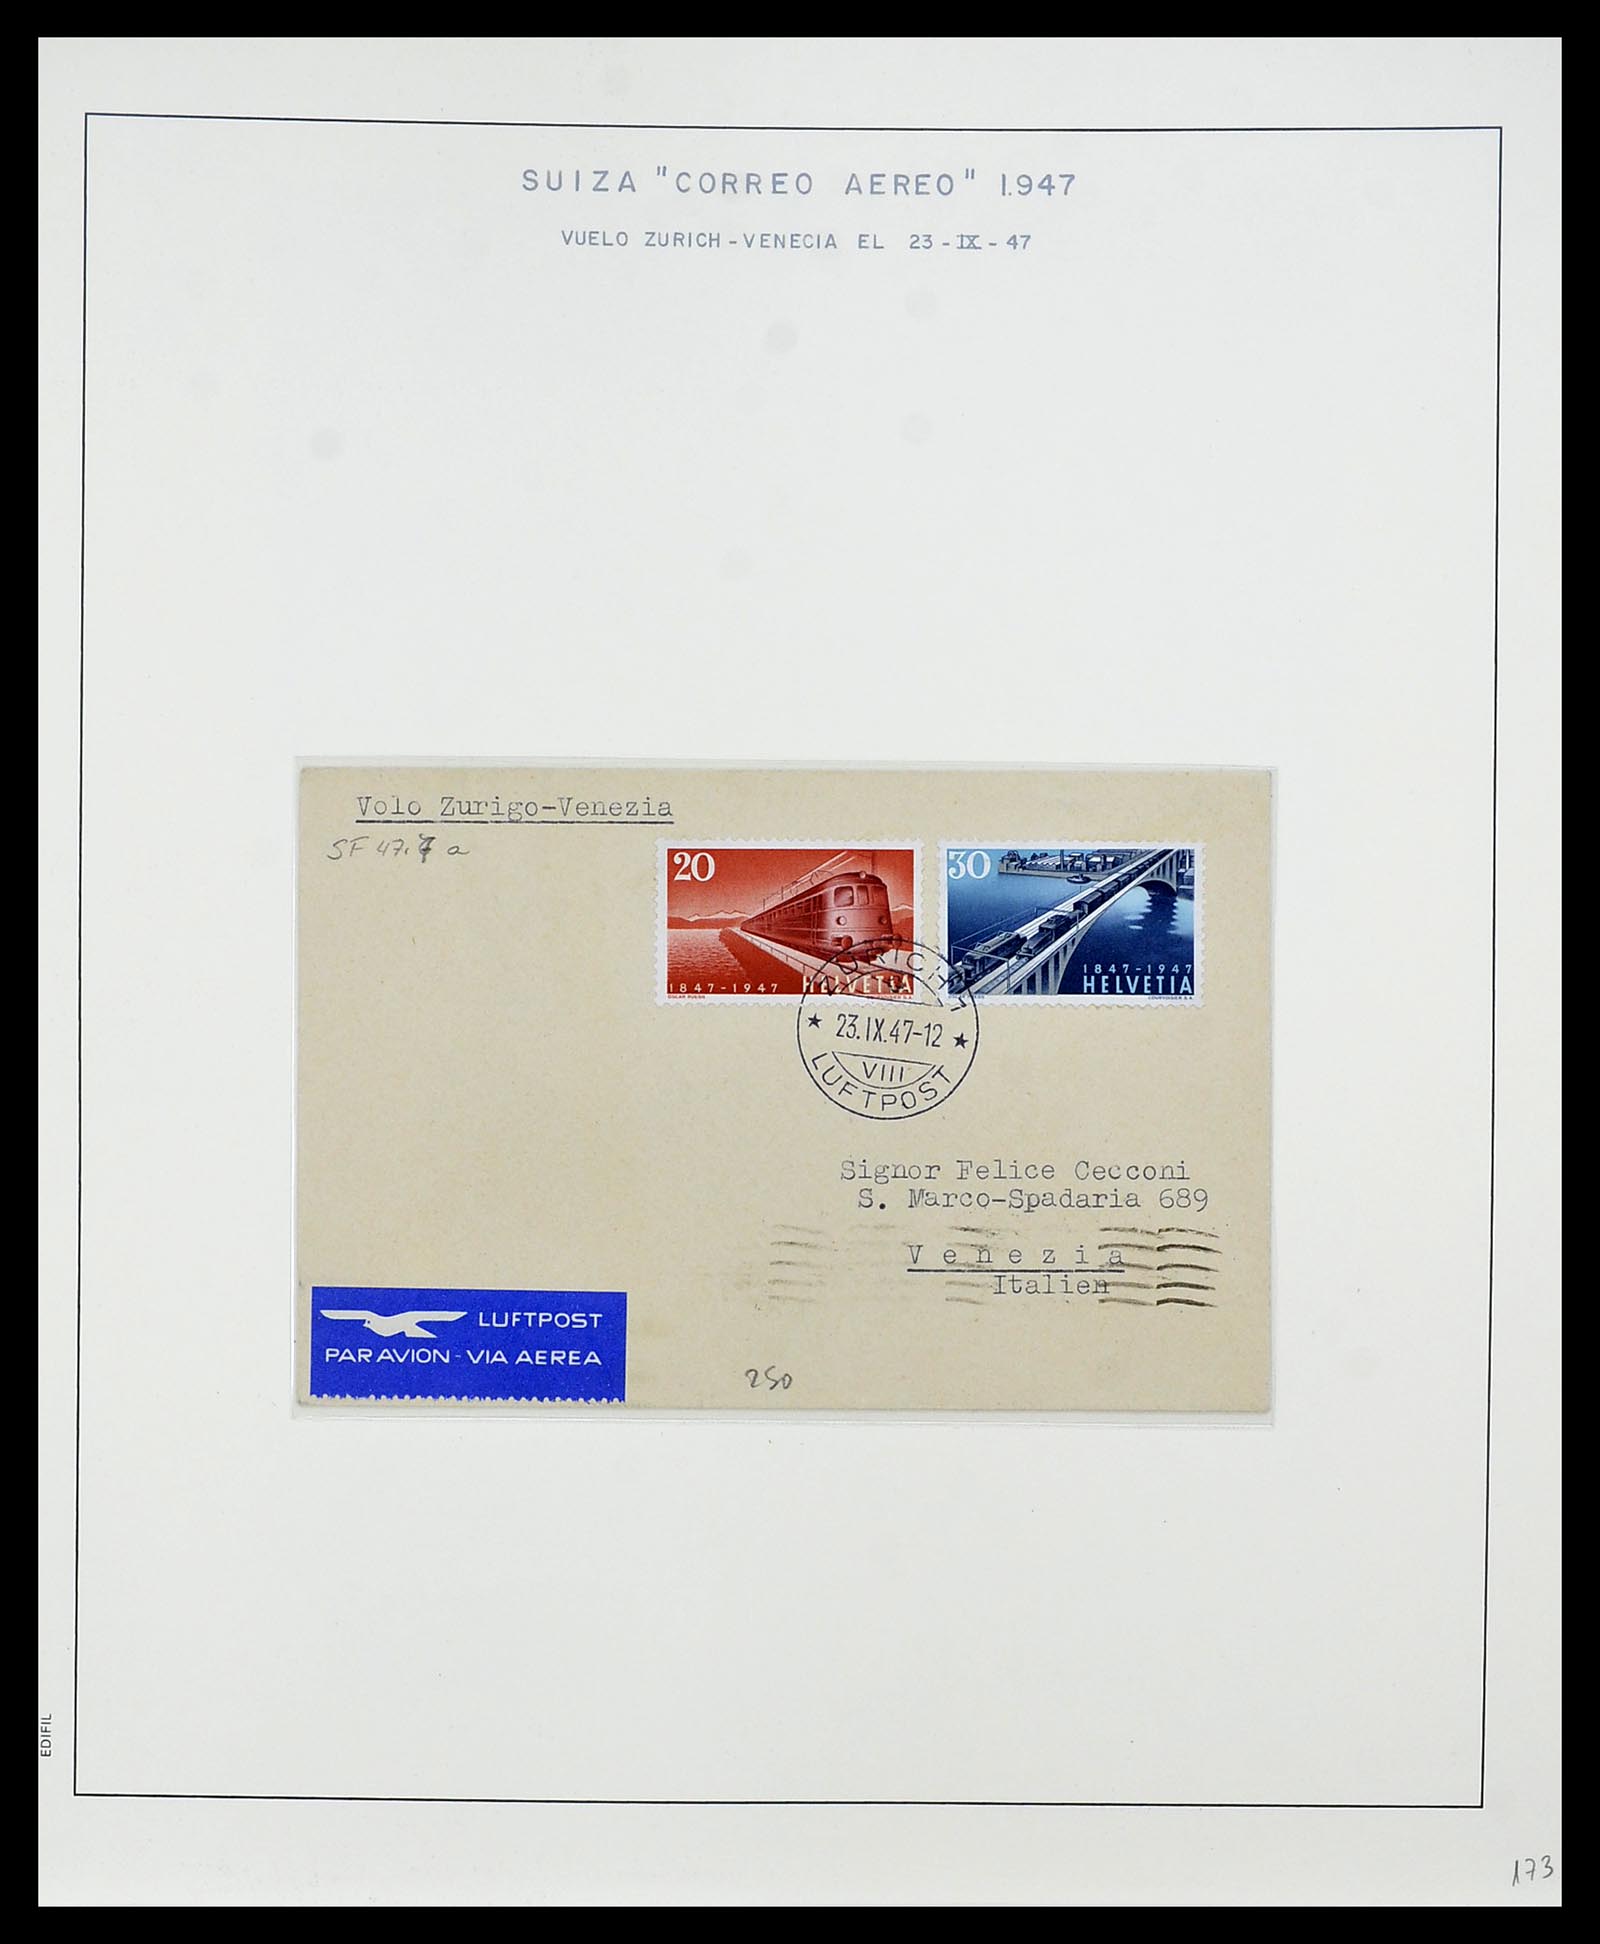 34137 047 - Stamp collection 34137 Switzerland airmail covers 1923-1963.